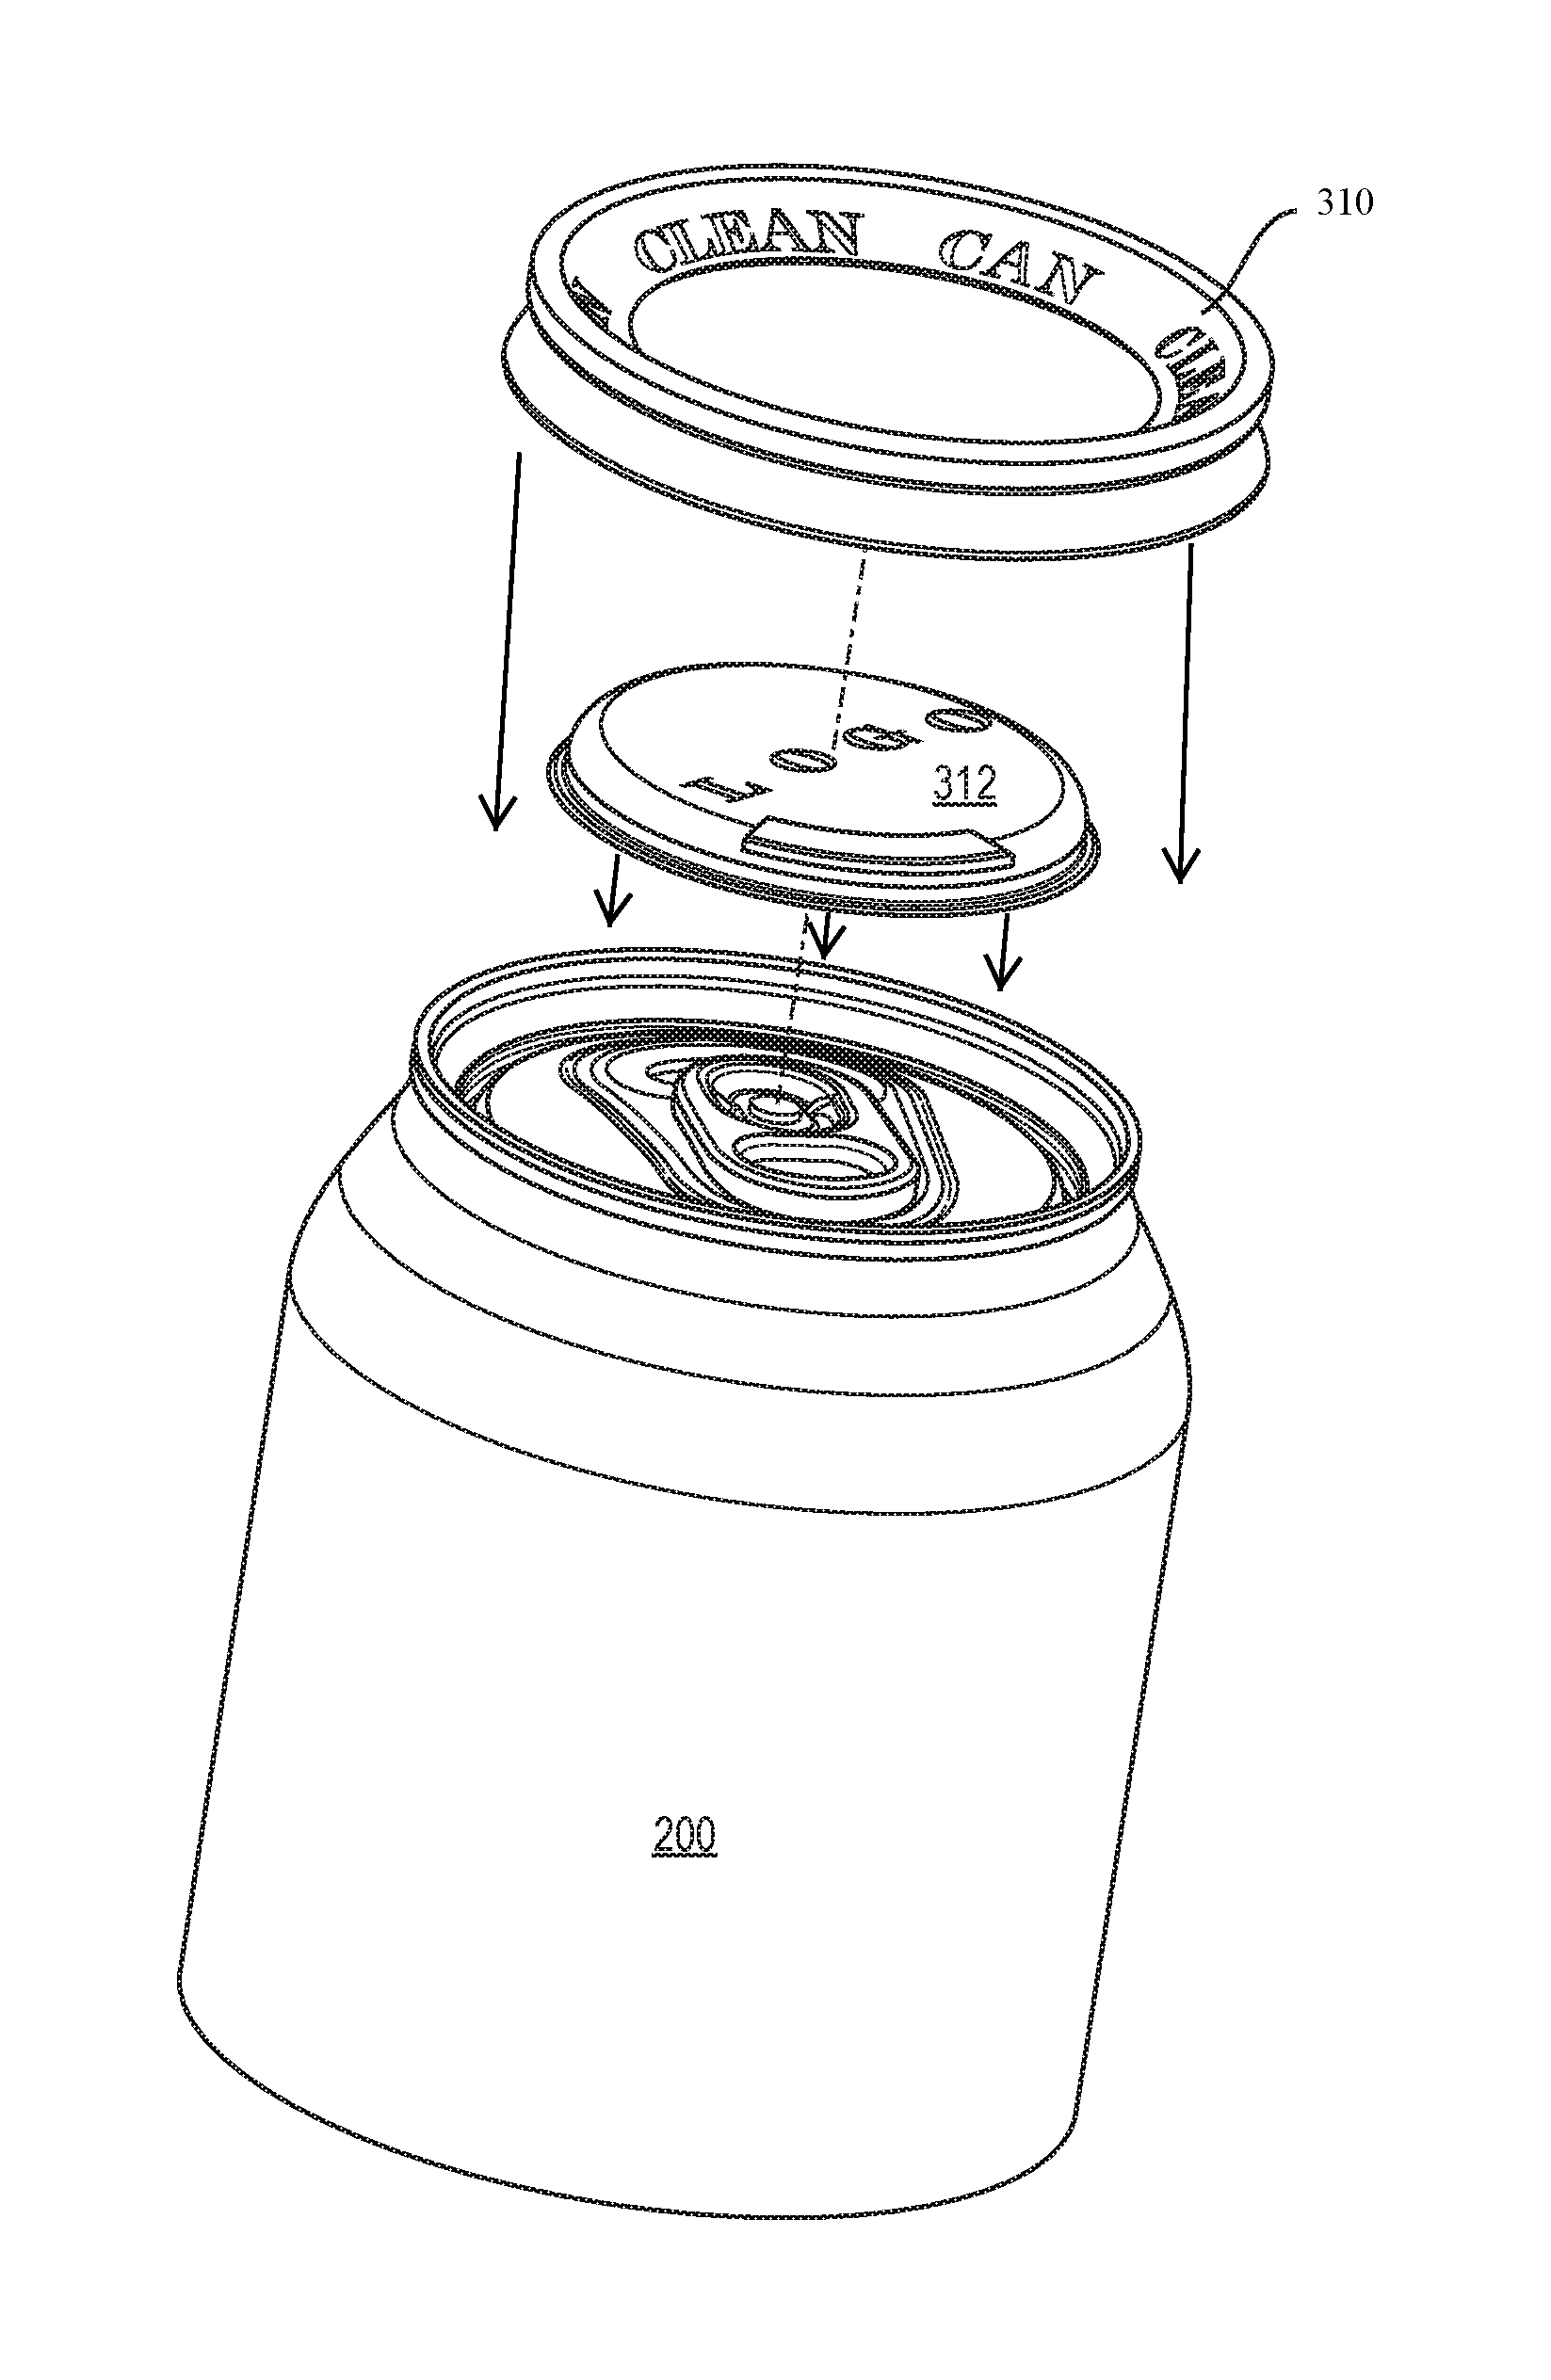 Beverage can marketing device with removable center cover